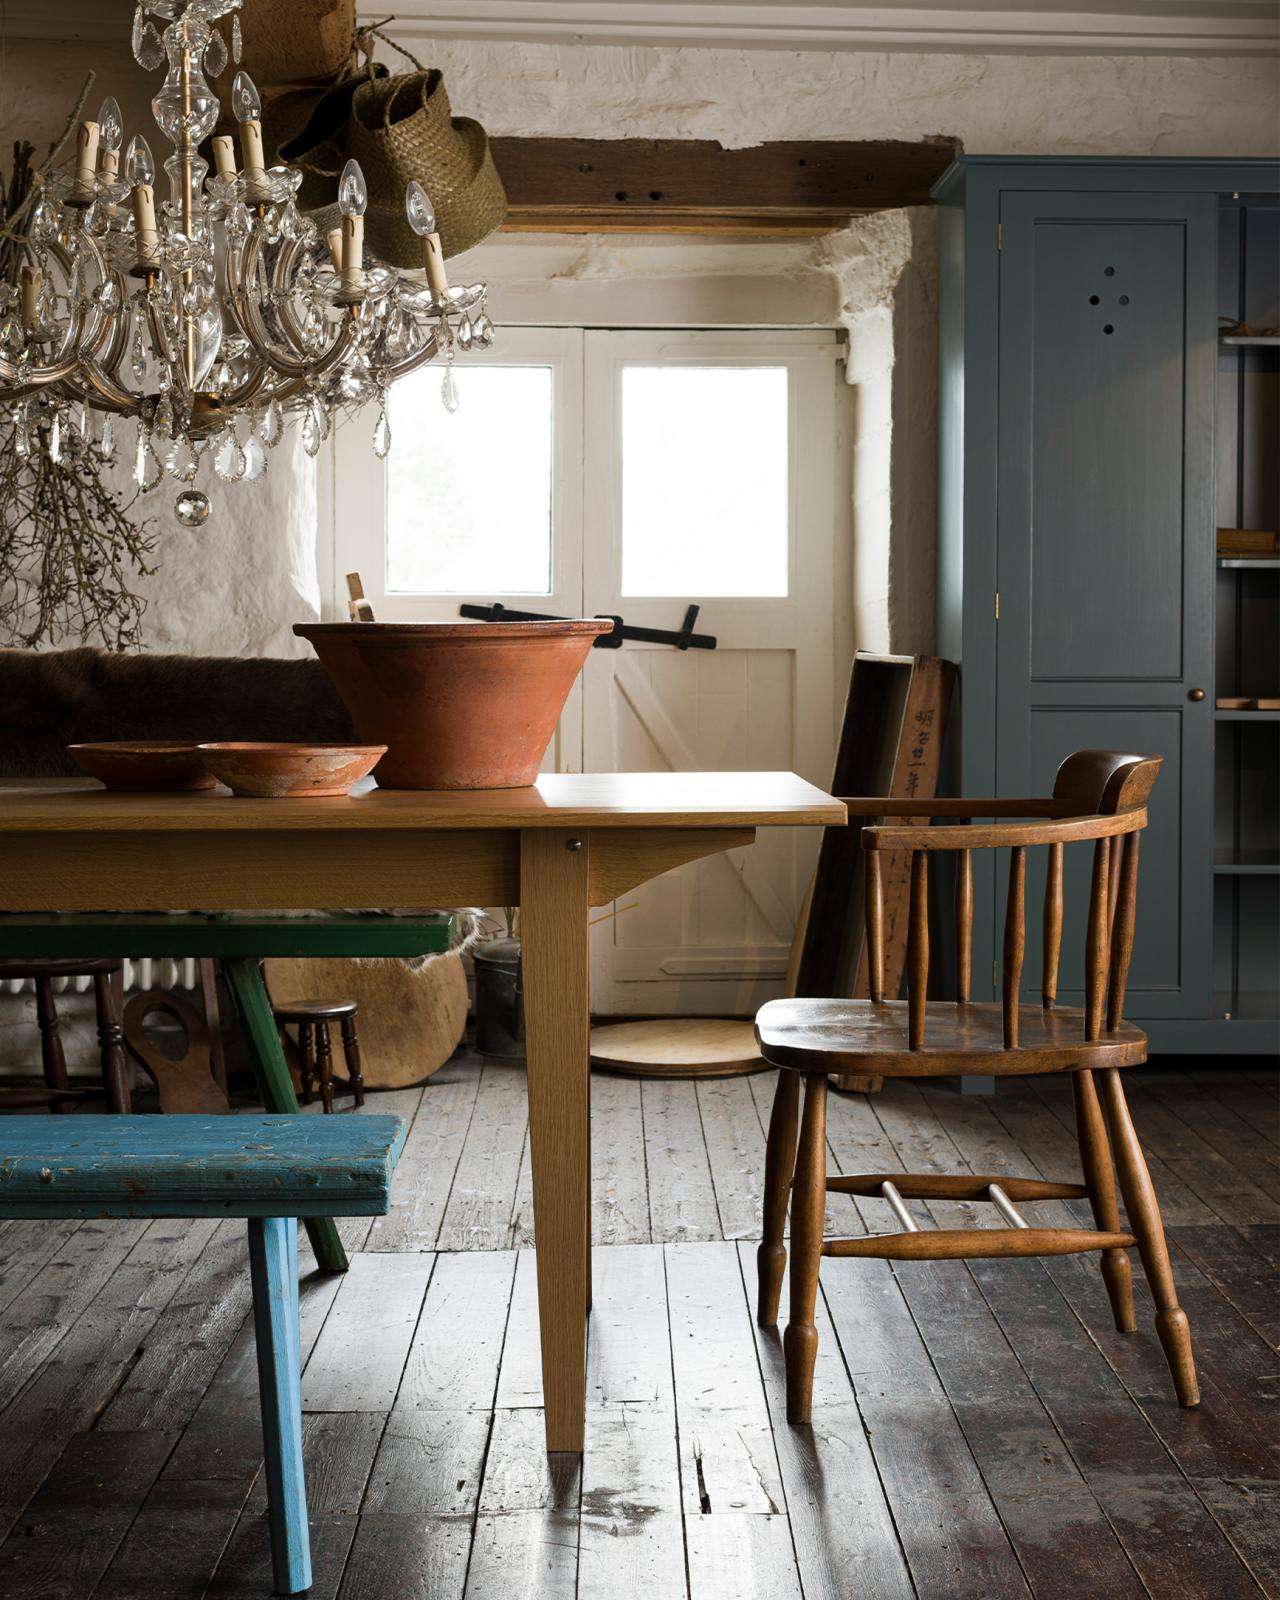 Peg Leg Table by deVOL in a lovely English country bespoke kitchen. #englishcountrykitchen #englishcountry